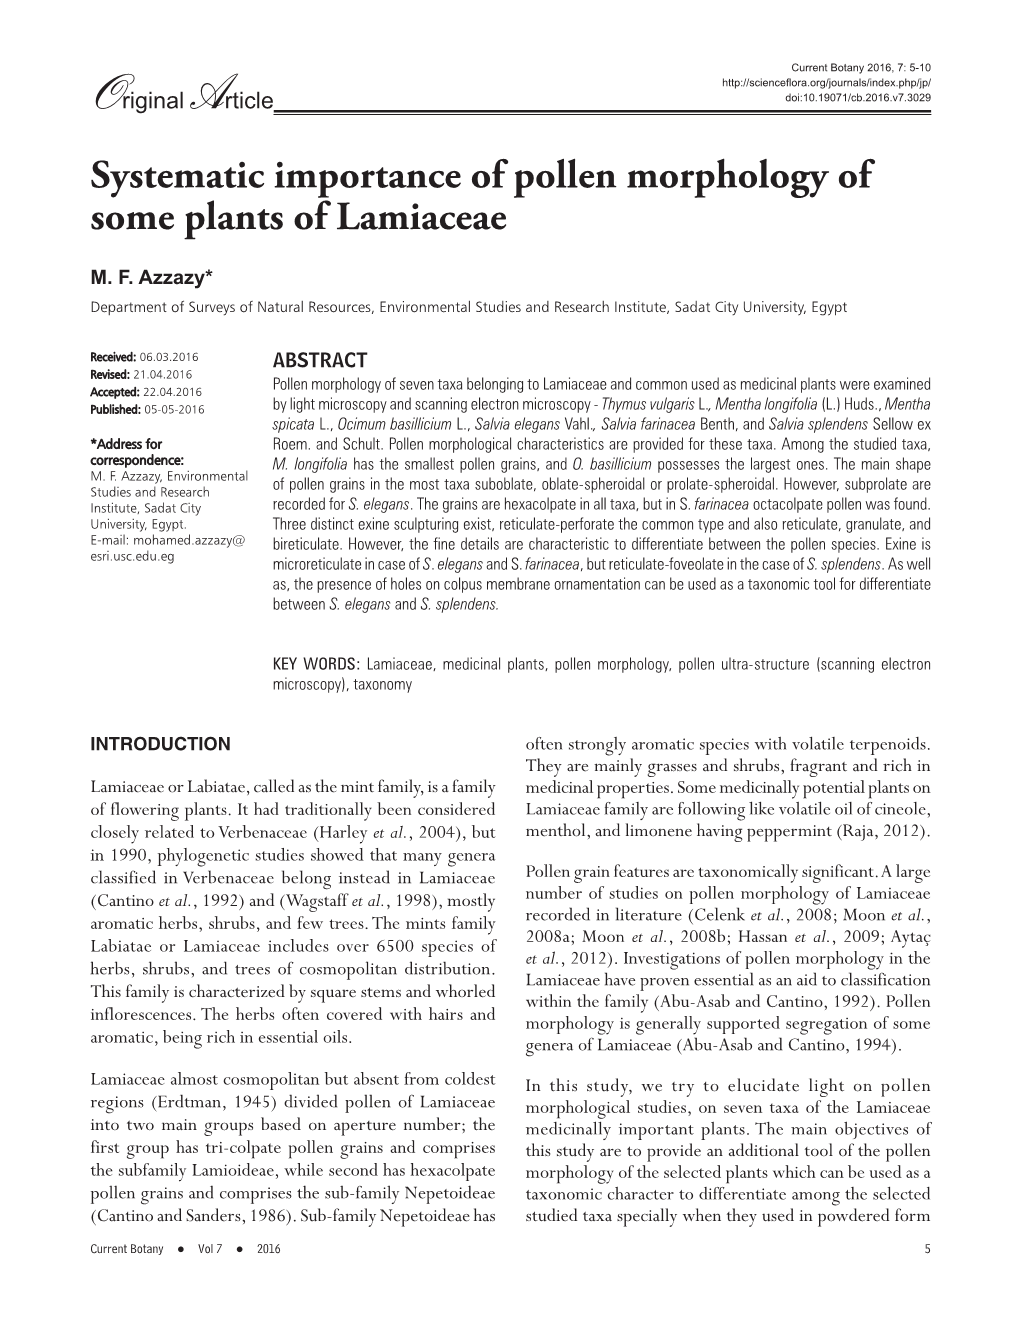 Systematic Importance of Pollen Morphology of Some Plants of Lamiaceae